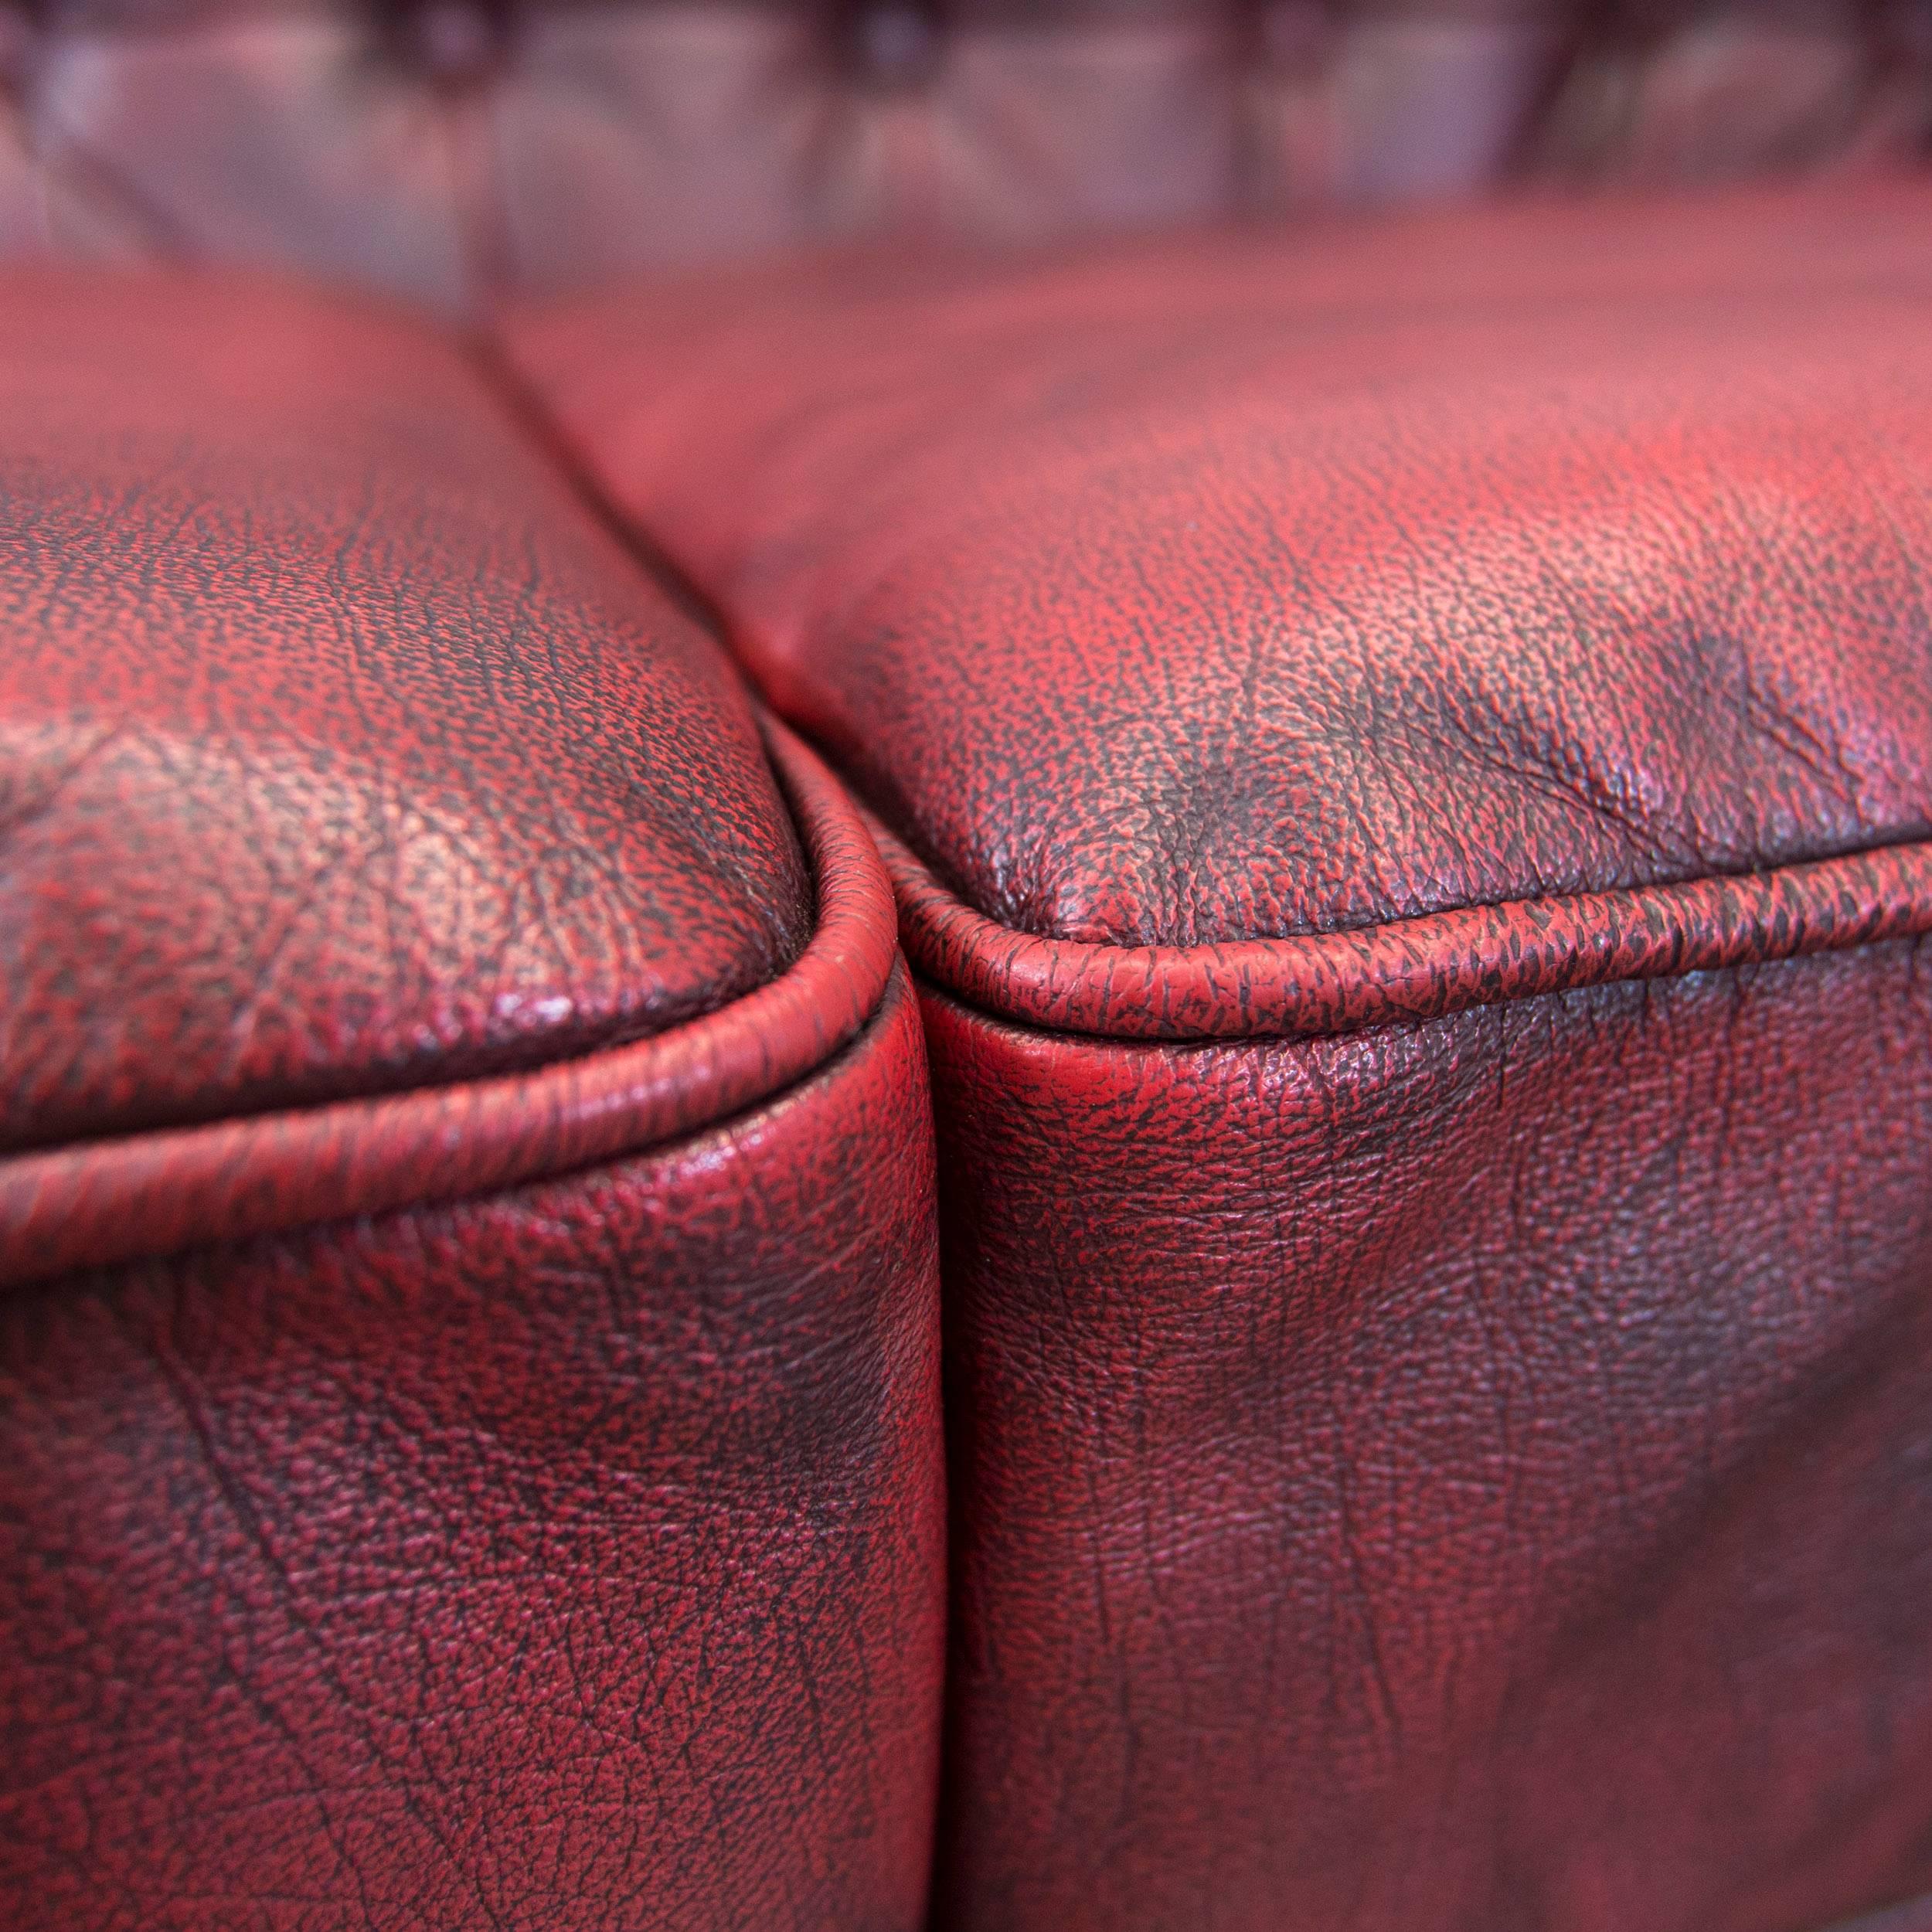 20th Century Chesterfield Designer Leather Sofa Red Two-Seat Couch Vintage Retro